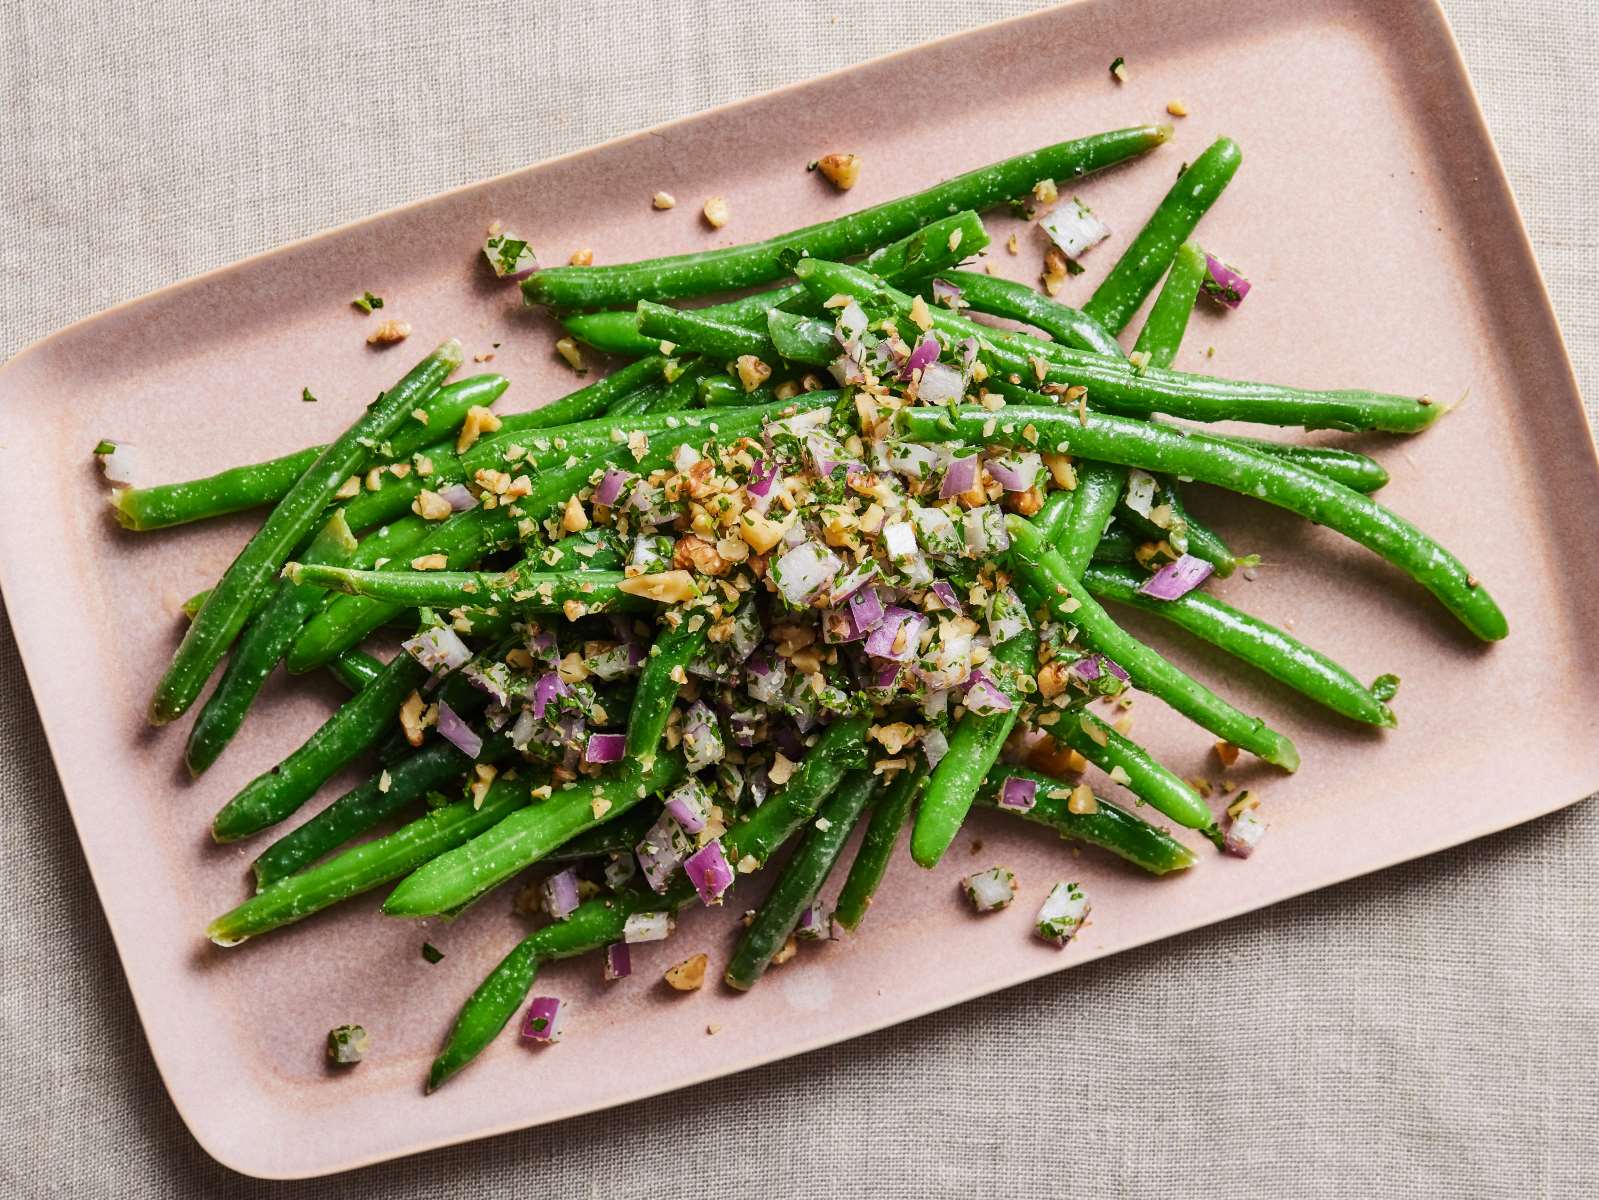 Sierra Brand Green Bean Salad: A Refreshing And Healthy Delight